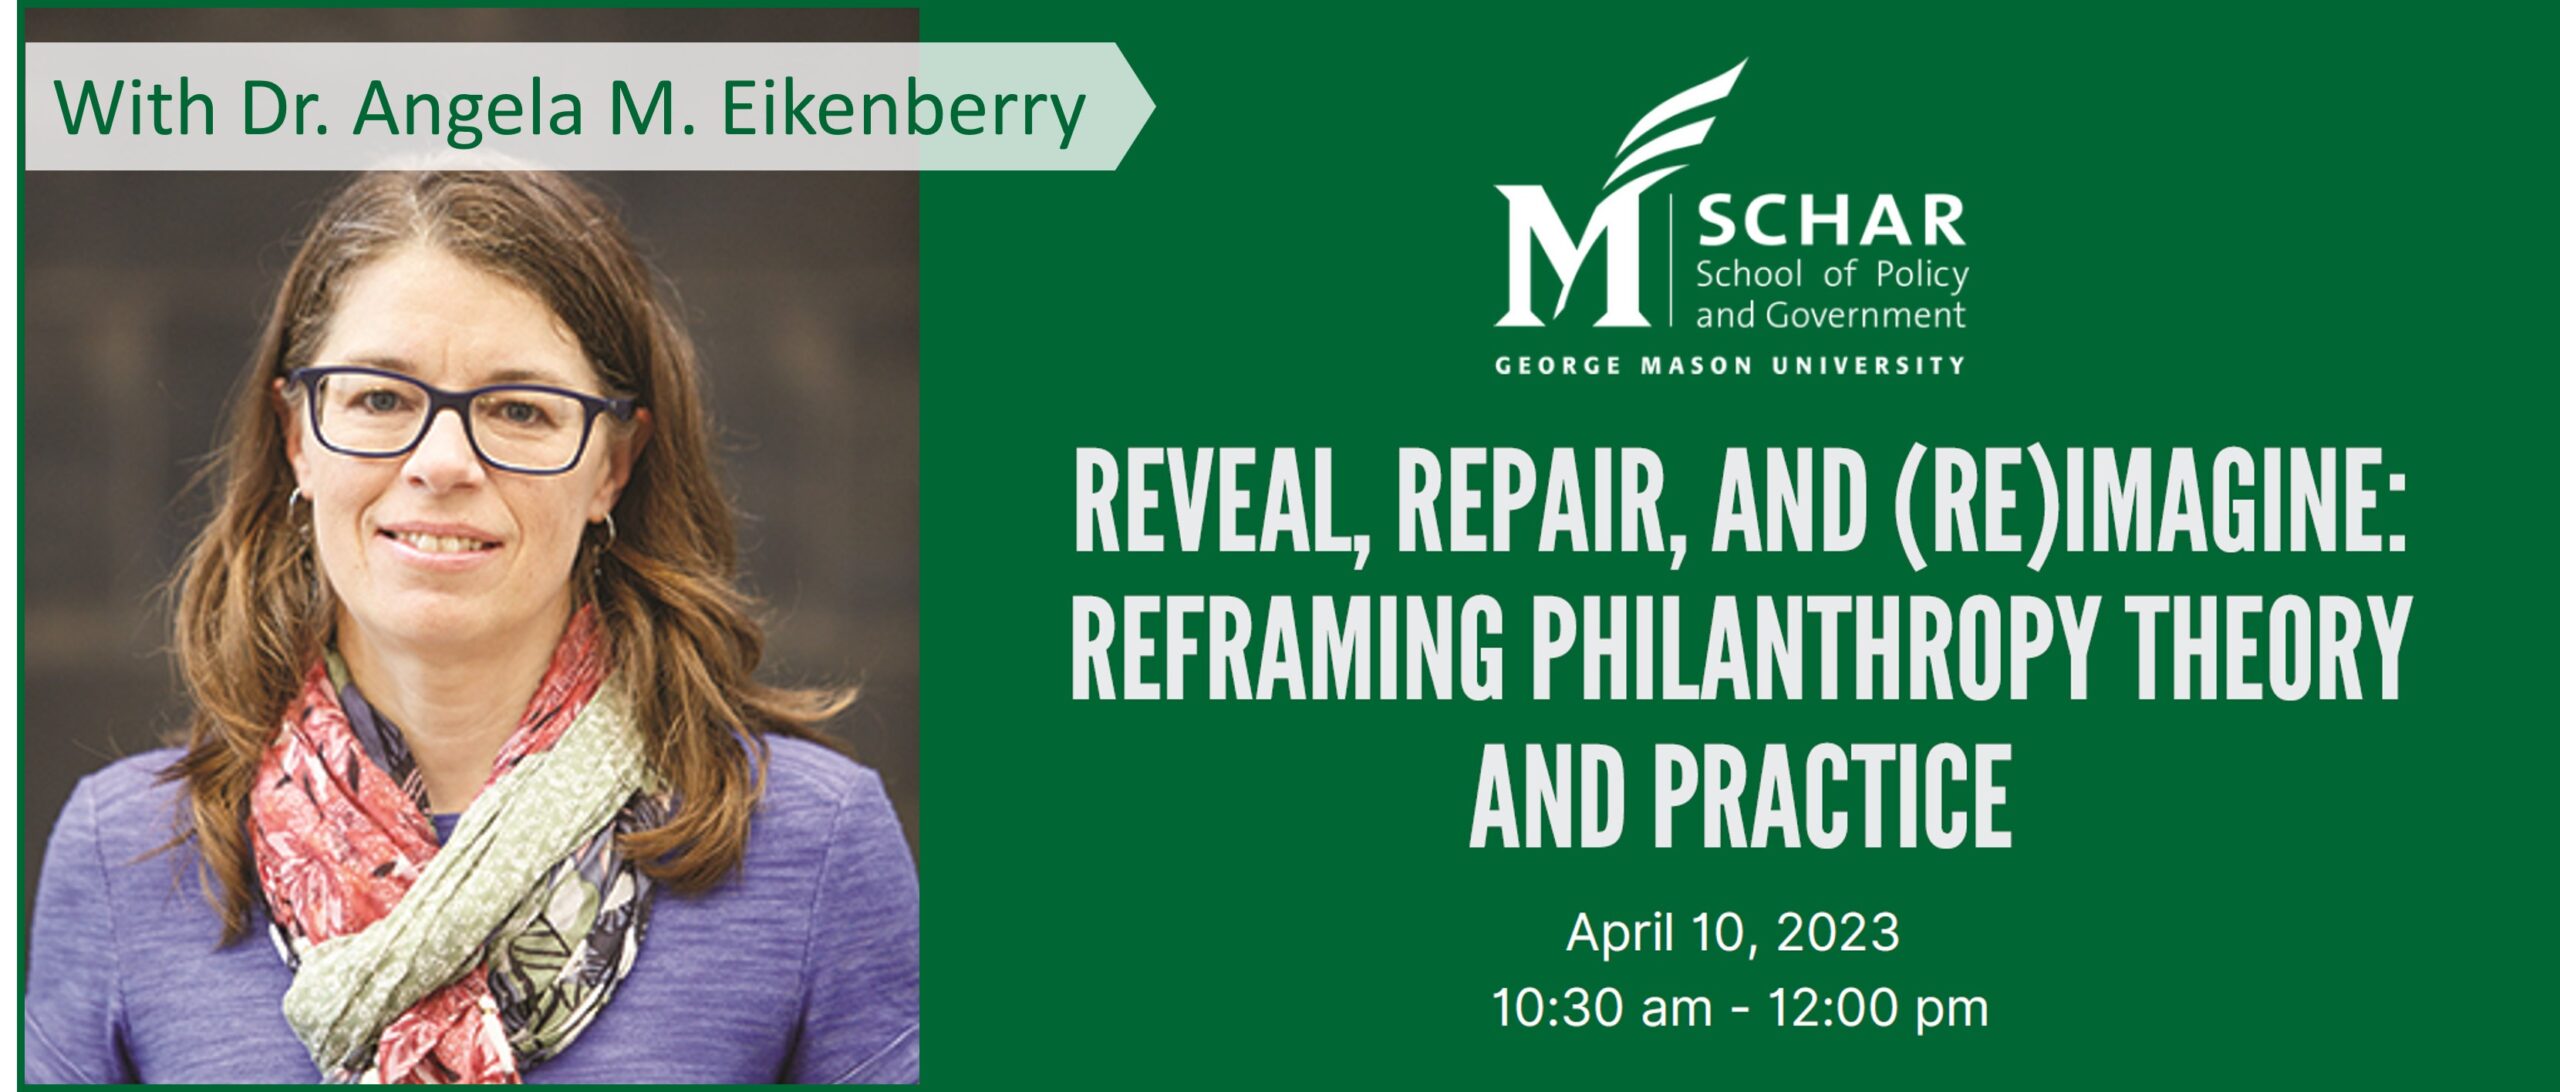 Please join us on April 10 for a talk by nonprofit scholar Dr. Angela M. Eikenberry